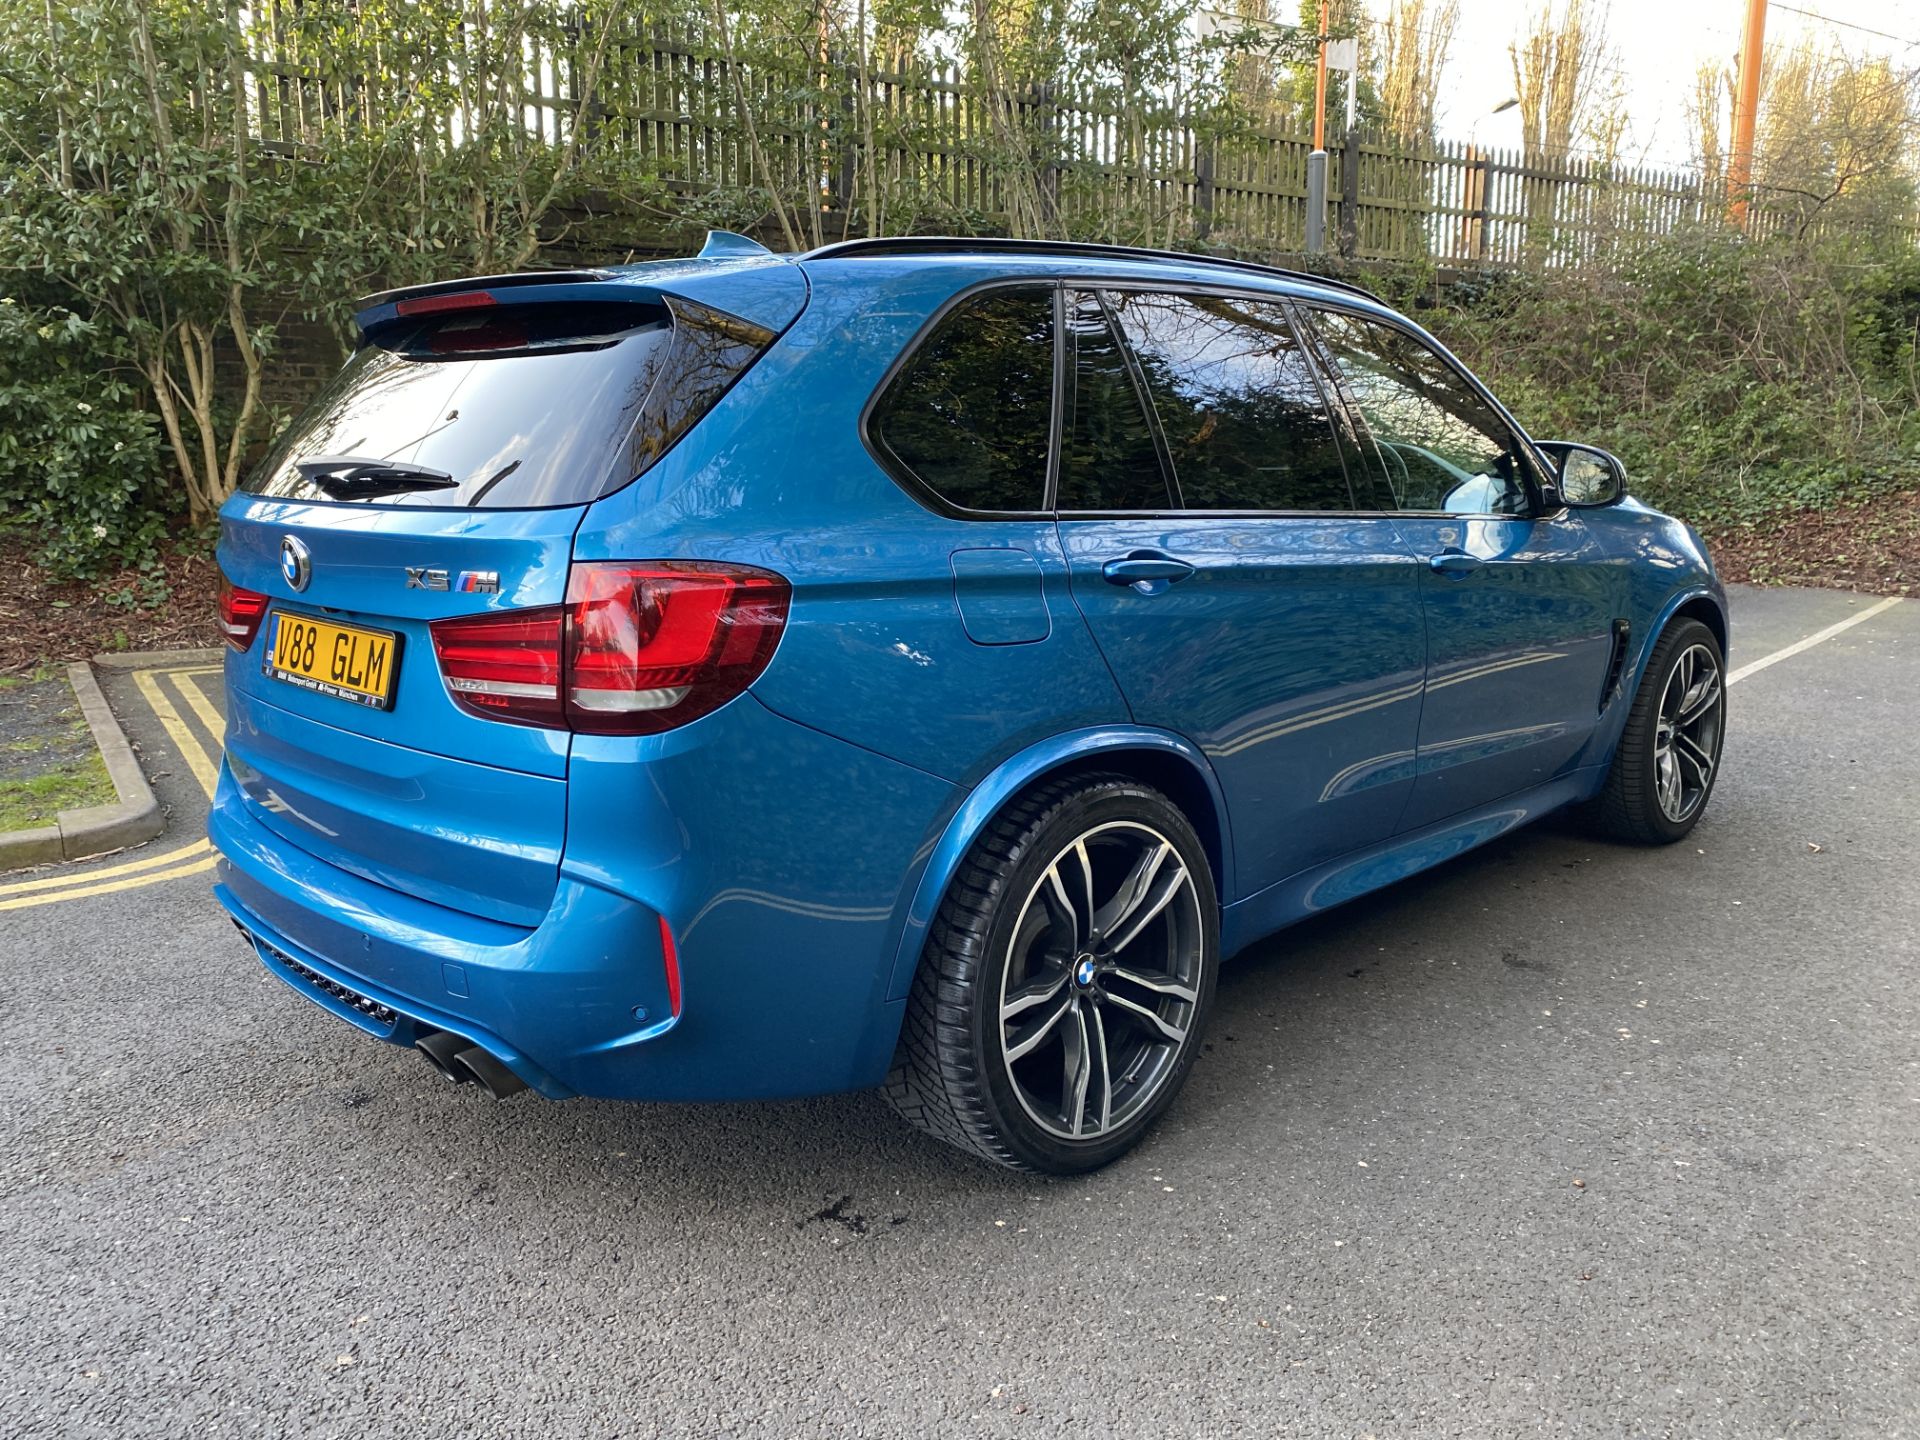 BMW X5 M - 2017 Fully Loaded Example Cost Over £100,000 When New £8k Options Fitted - Image 8 of 66